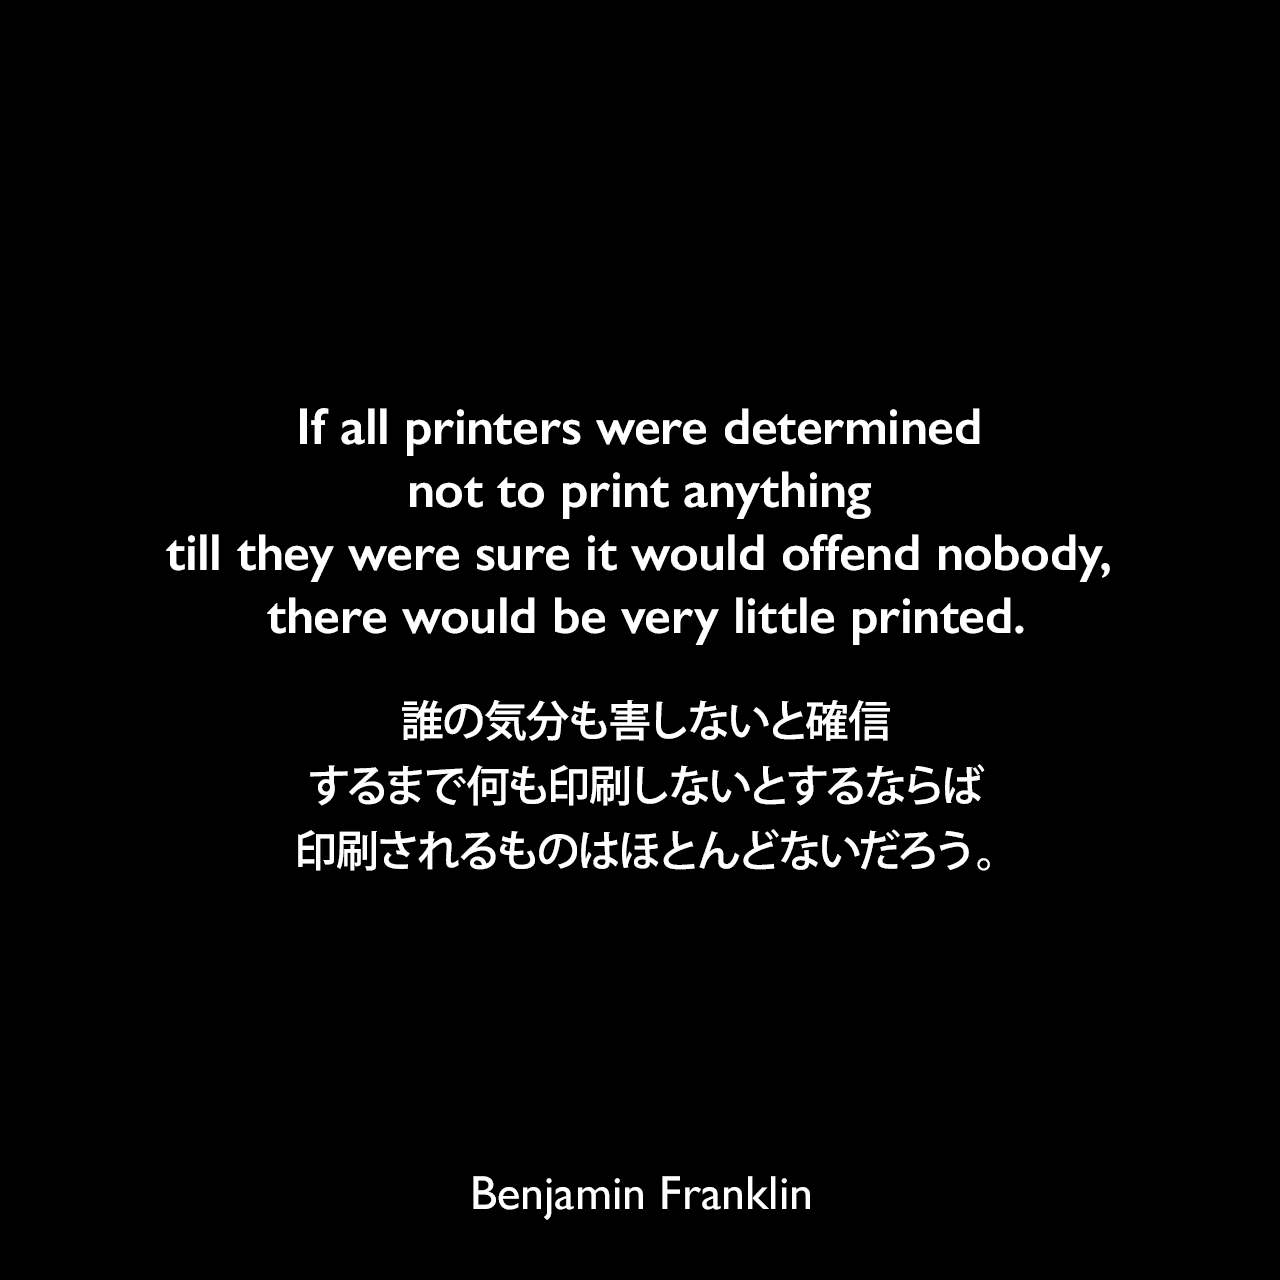 If all printers were determined not to print anything till they were sure it would offend nobody, there would be very little printed.誰の気分も害しないと確信するまで何も印刷しないとするならば、印刷されるものはほとんどないだろう。- ベンジャミン・フランクリンによる本「Apology for Printers（1730年）」よりBenjamin Franklin